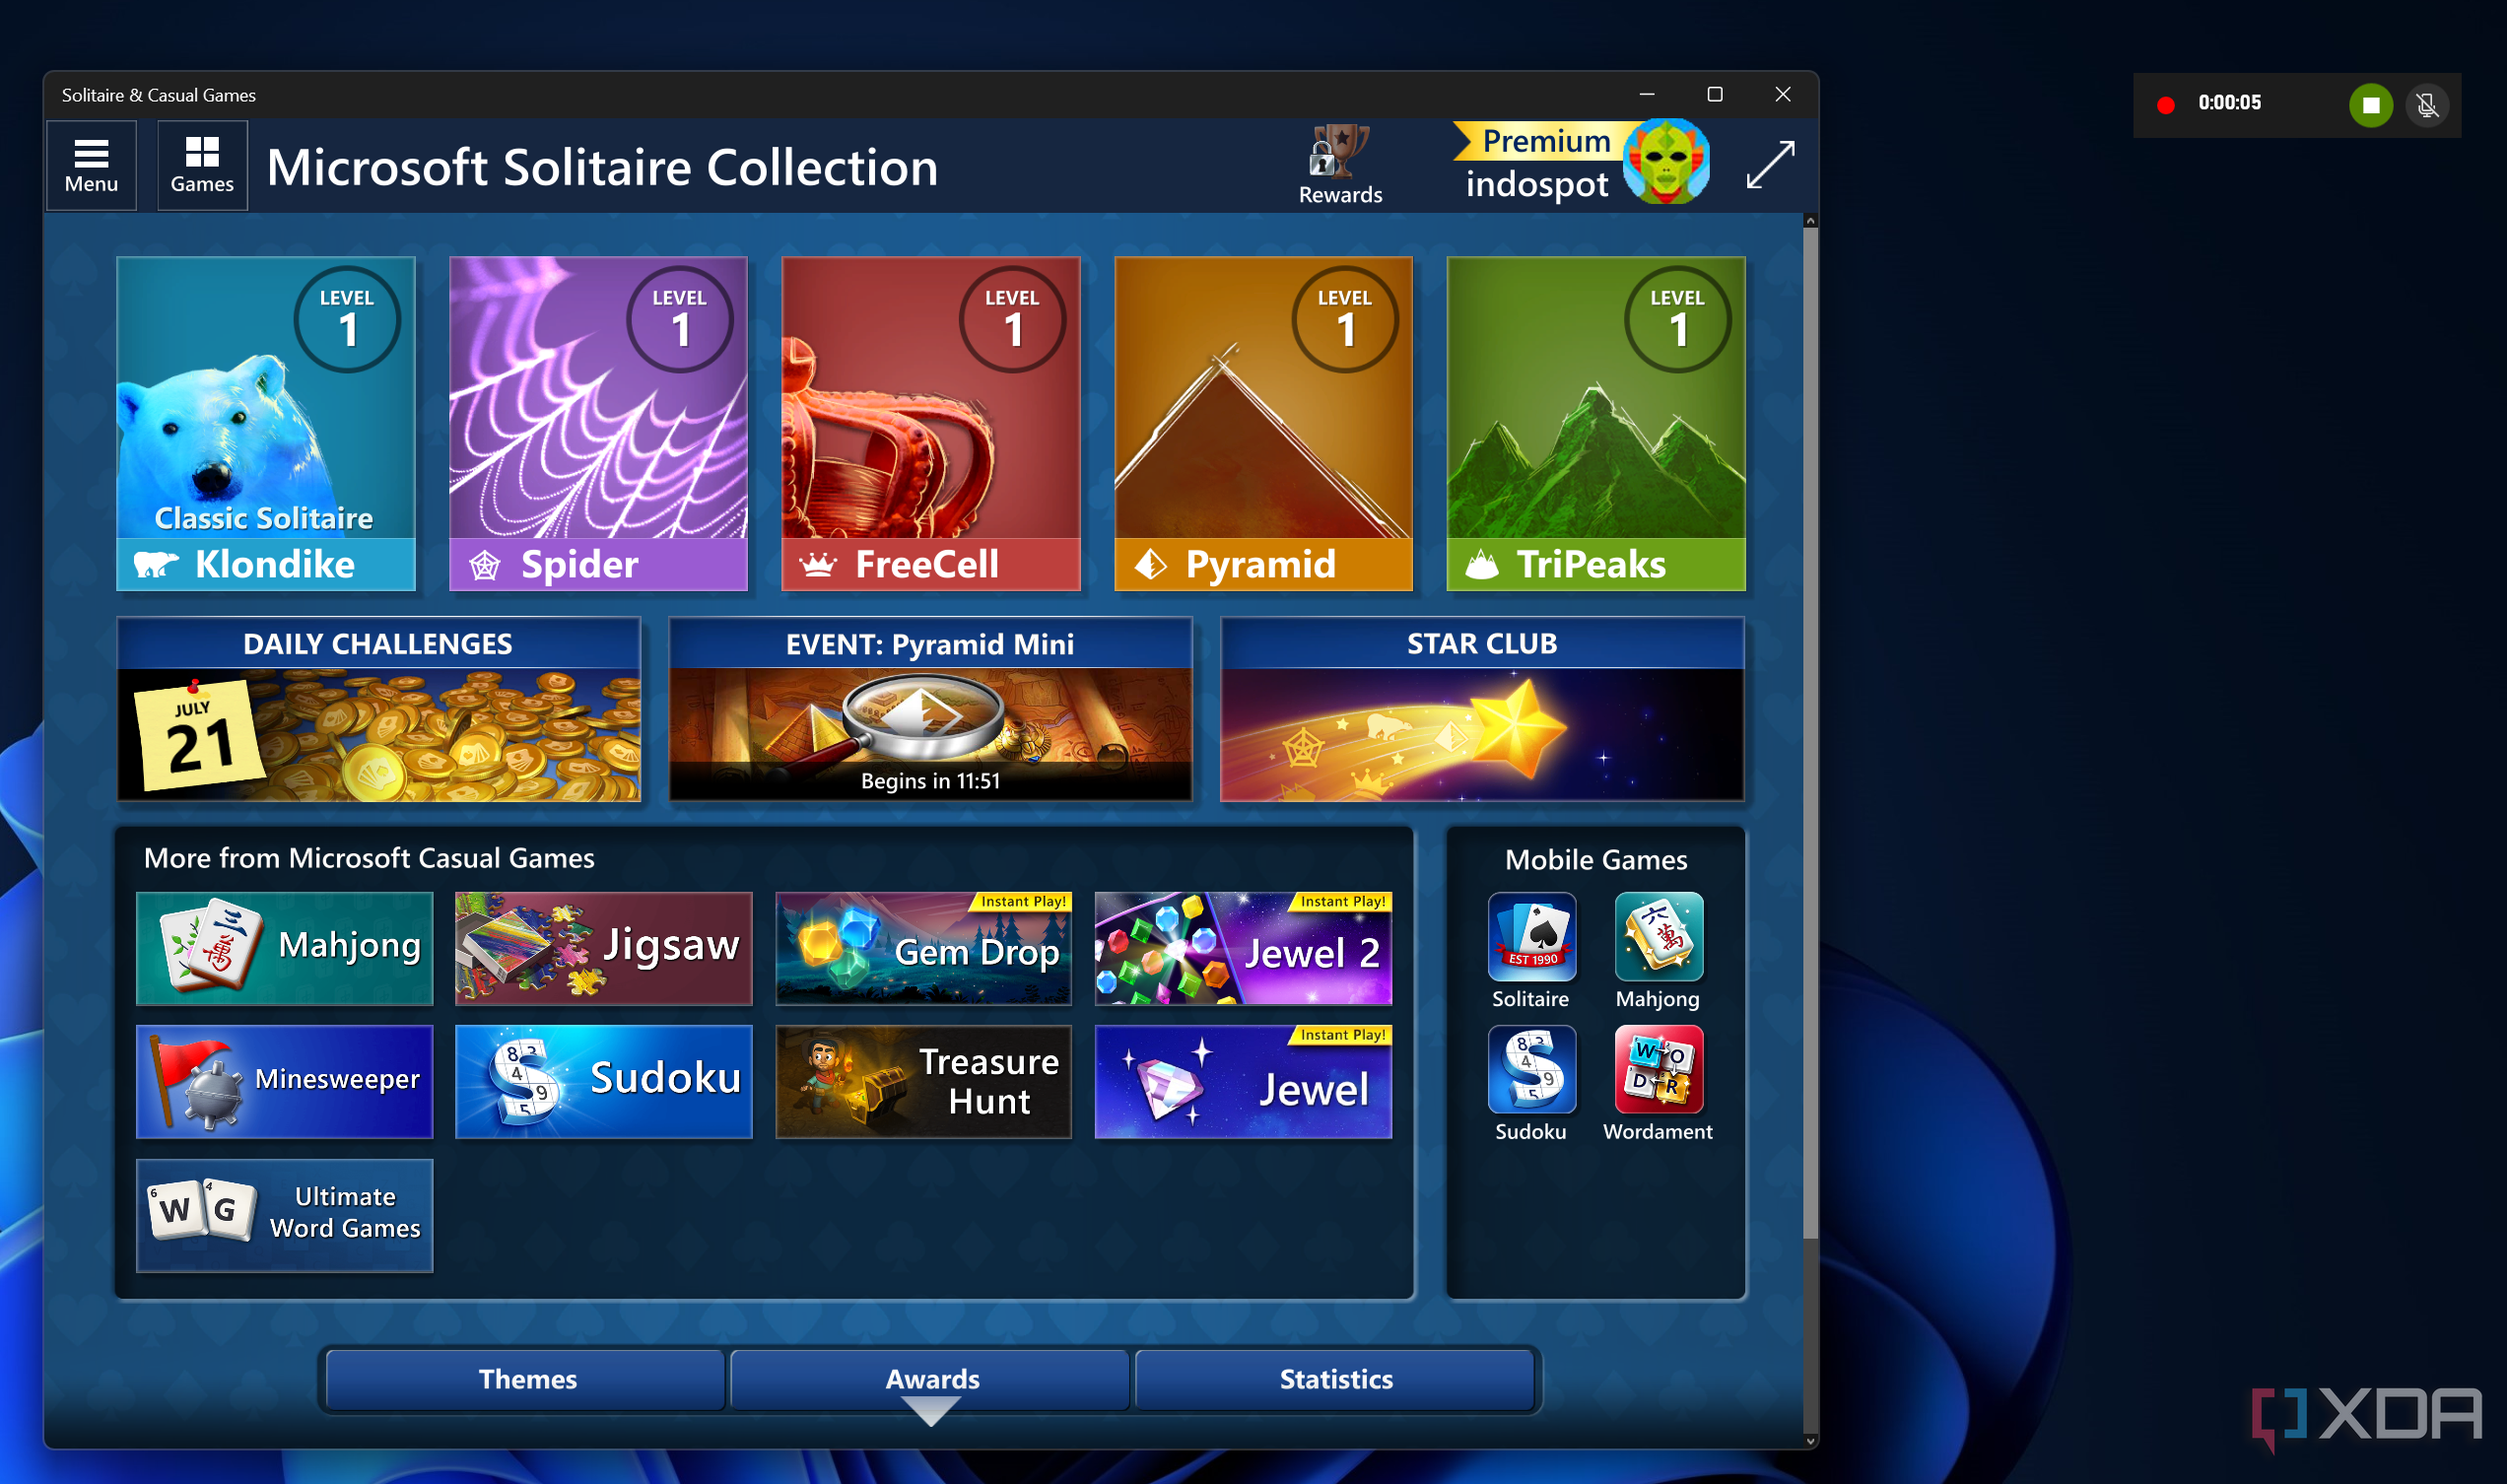 Screenshot of Microsoft Solitaire collection with a small overlay showing that the screen is being recorded. The overlay ahs a button to stop the recording and one to unmute the microphone